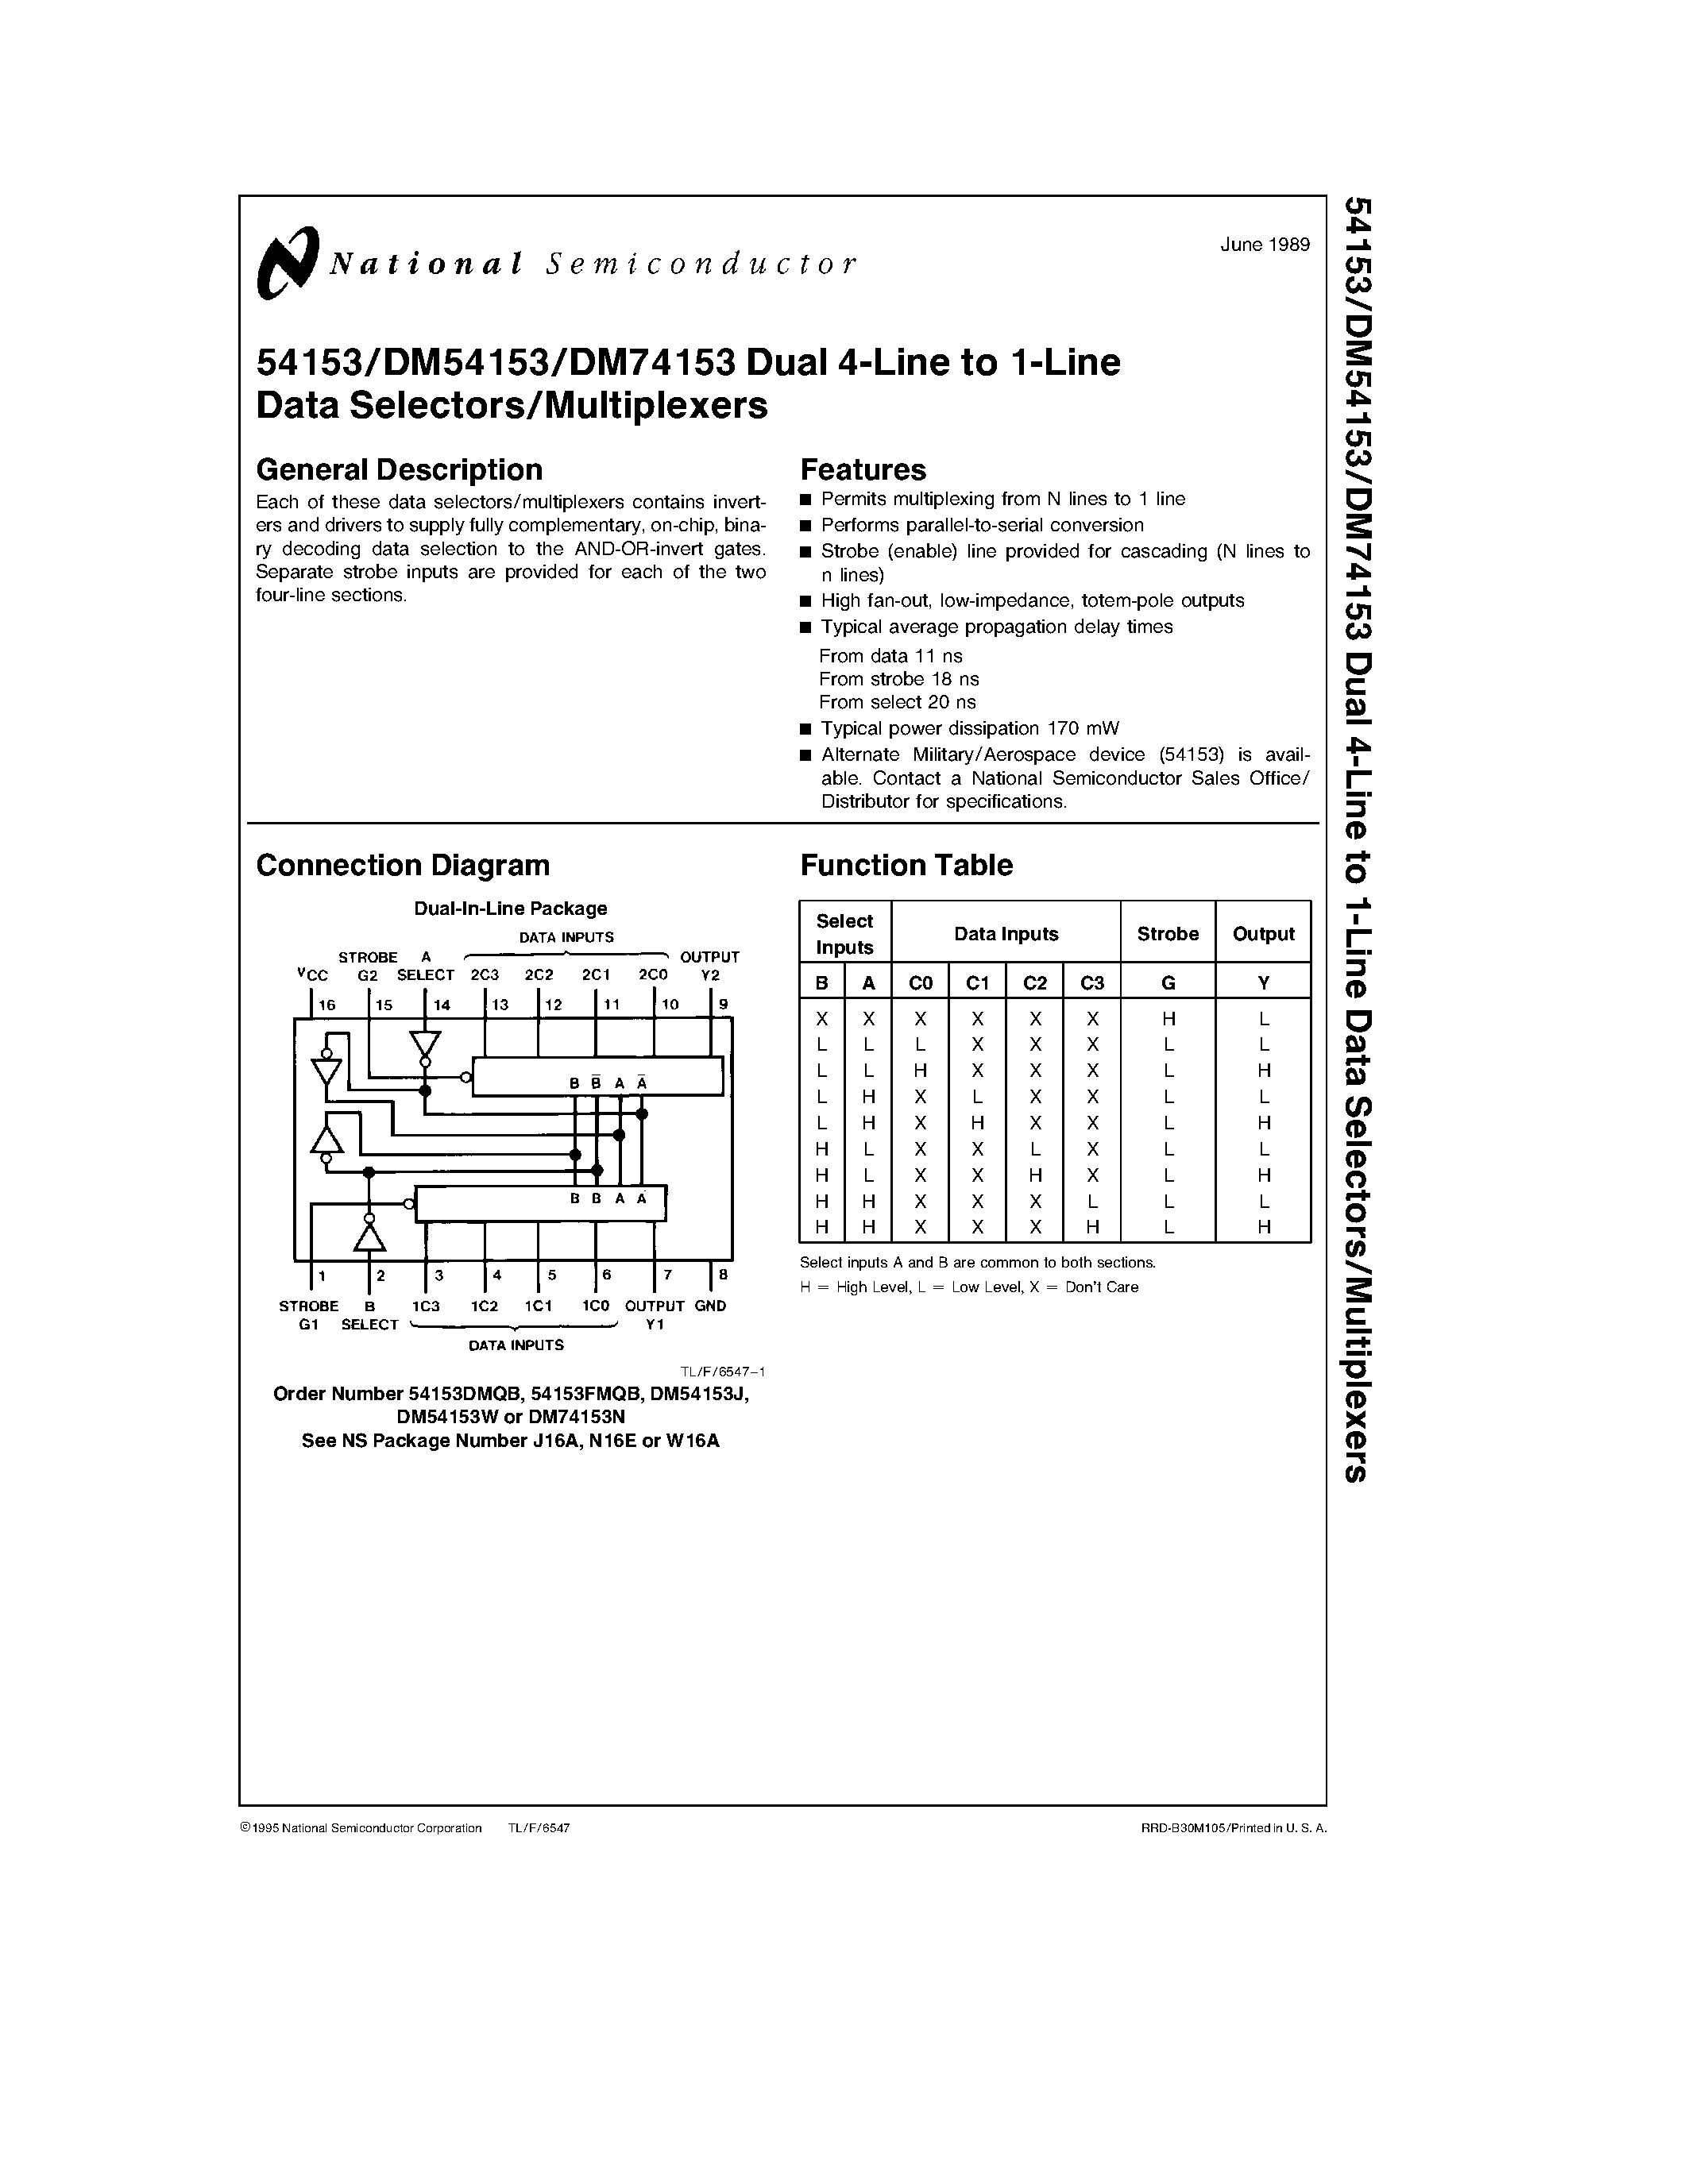 Datasheet 54153FMQB - Dual 4-Line to 1-Line Data Selectors/Multiplexers page 1